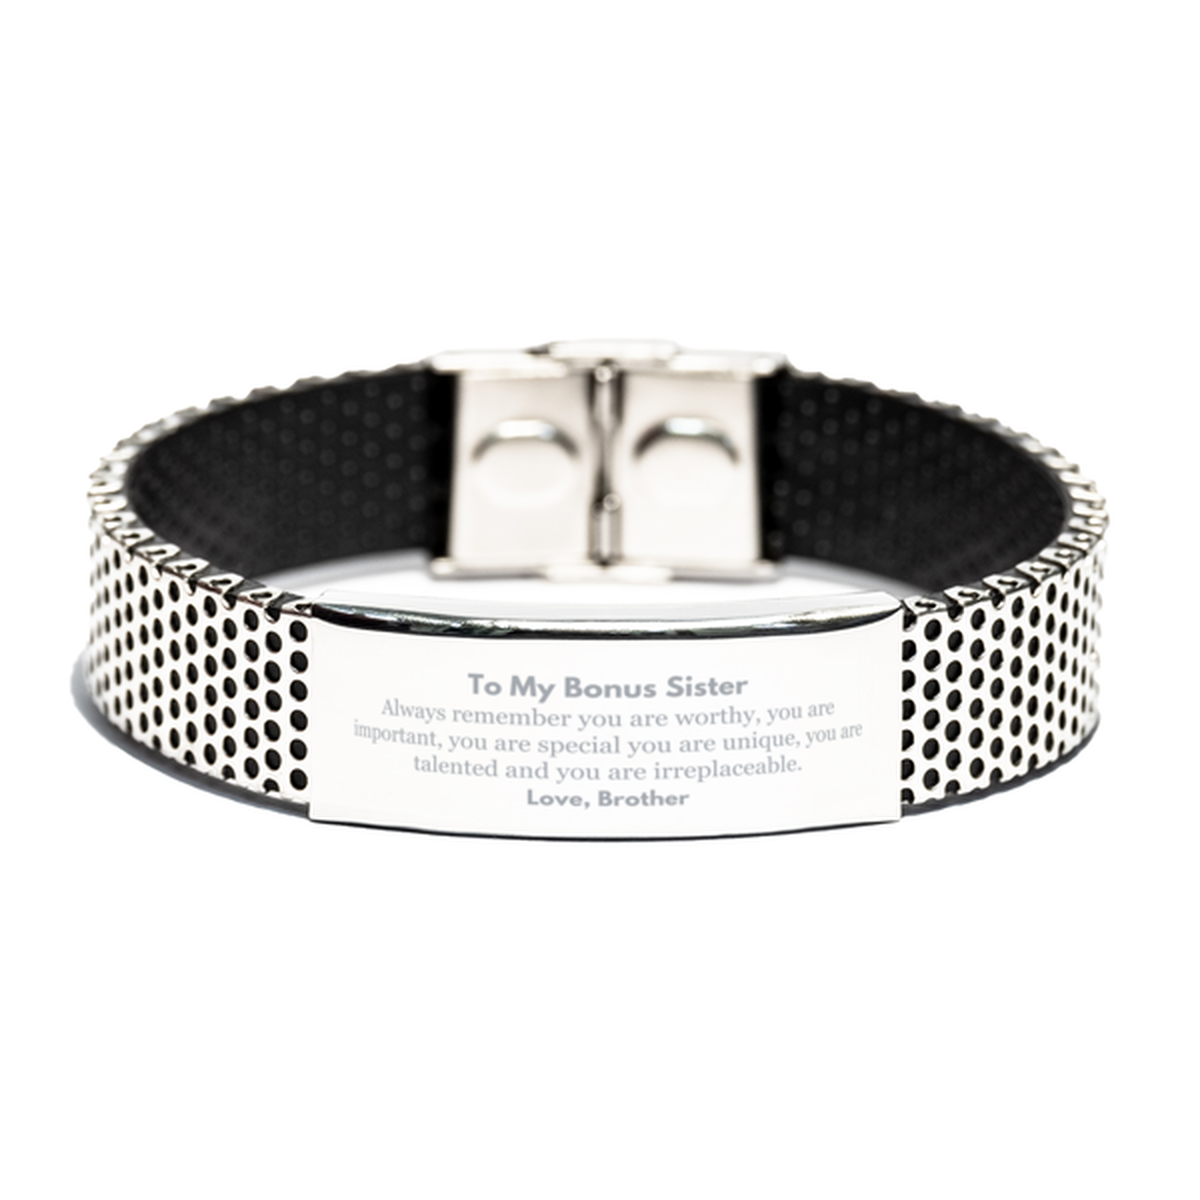 Bonus Sister Birthday Gifts from Brother, Inspirational Stainless Steel Bracelet for Bonus Sister Christmas Graduation Gifts for Bonus Sister Always remember you are worthy, you are important. Love, Brother